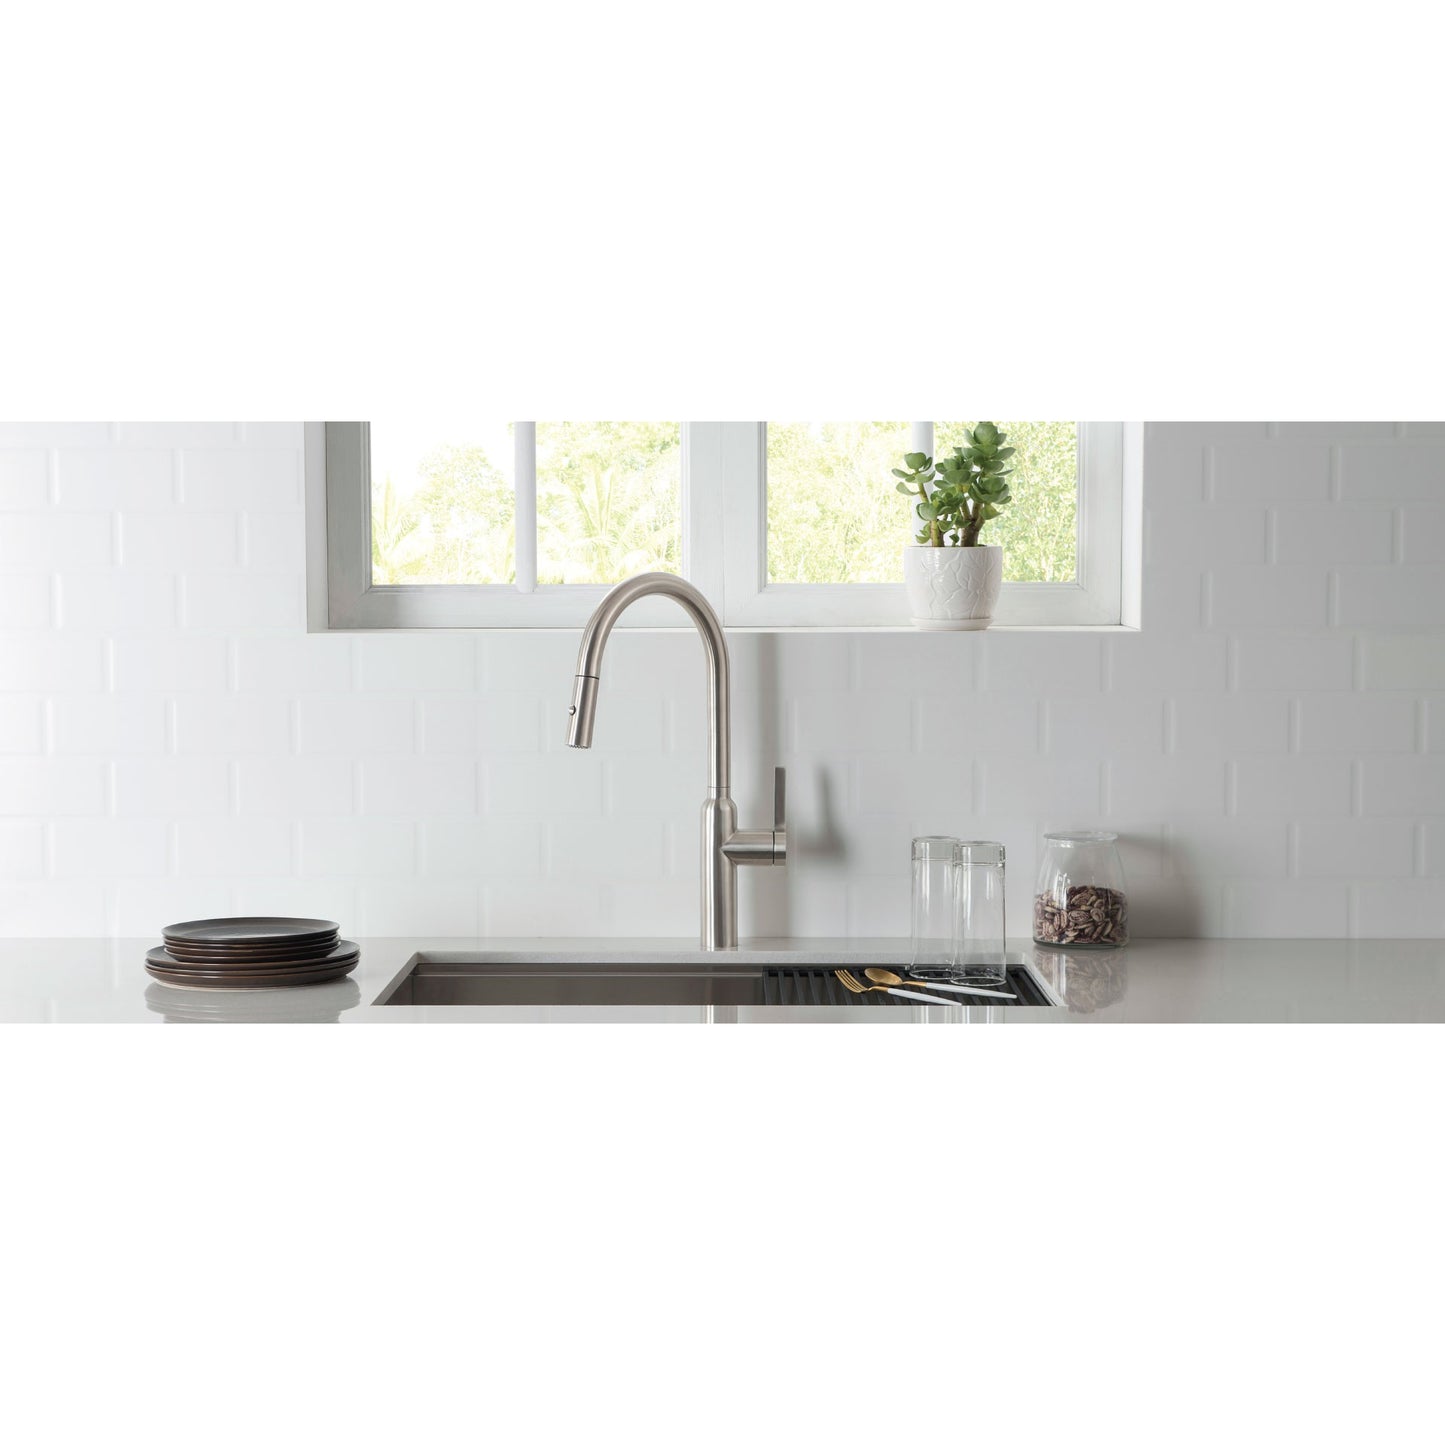 Isenberg Klassiker Ziel 17" Single Hole Polished Steel Stainless Steel Pull-Down Kitchen Faucet With Dual Function Sprayer